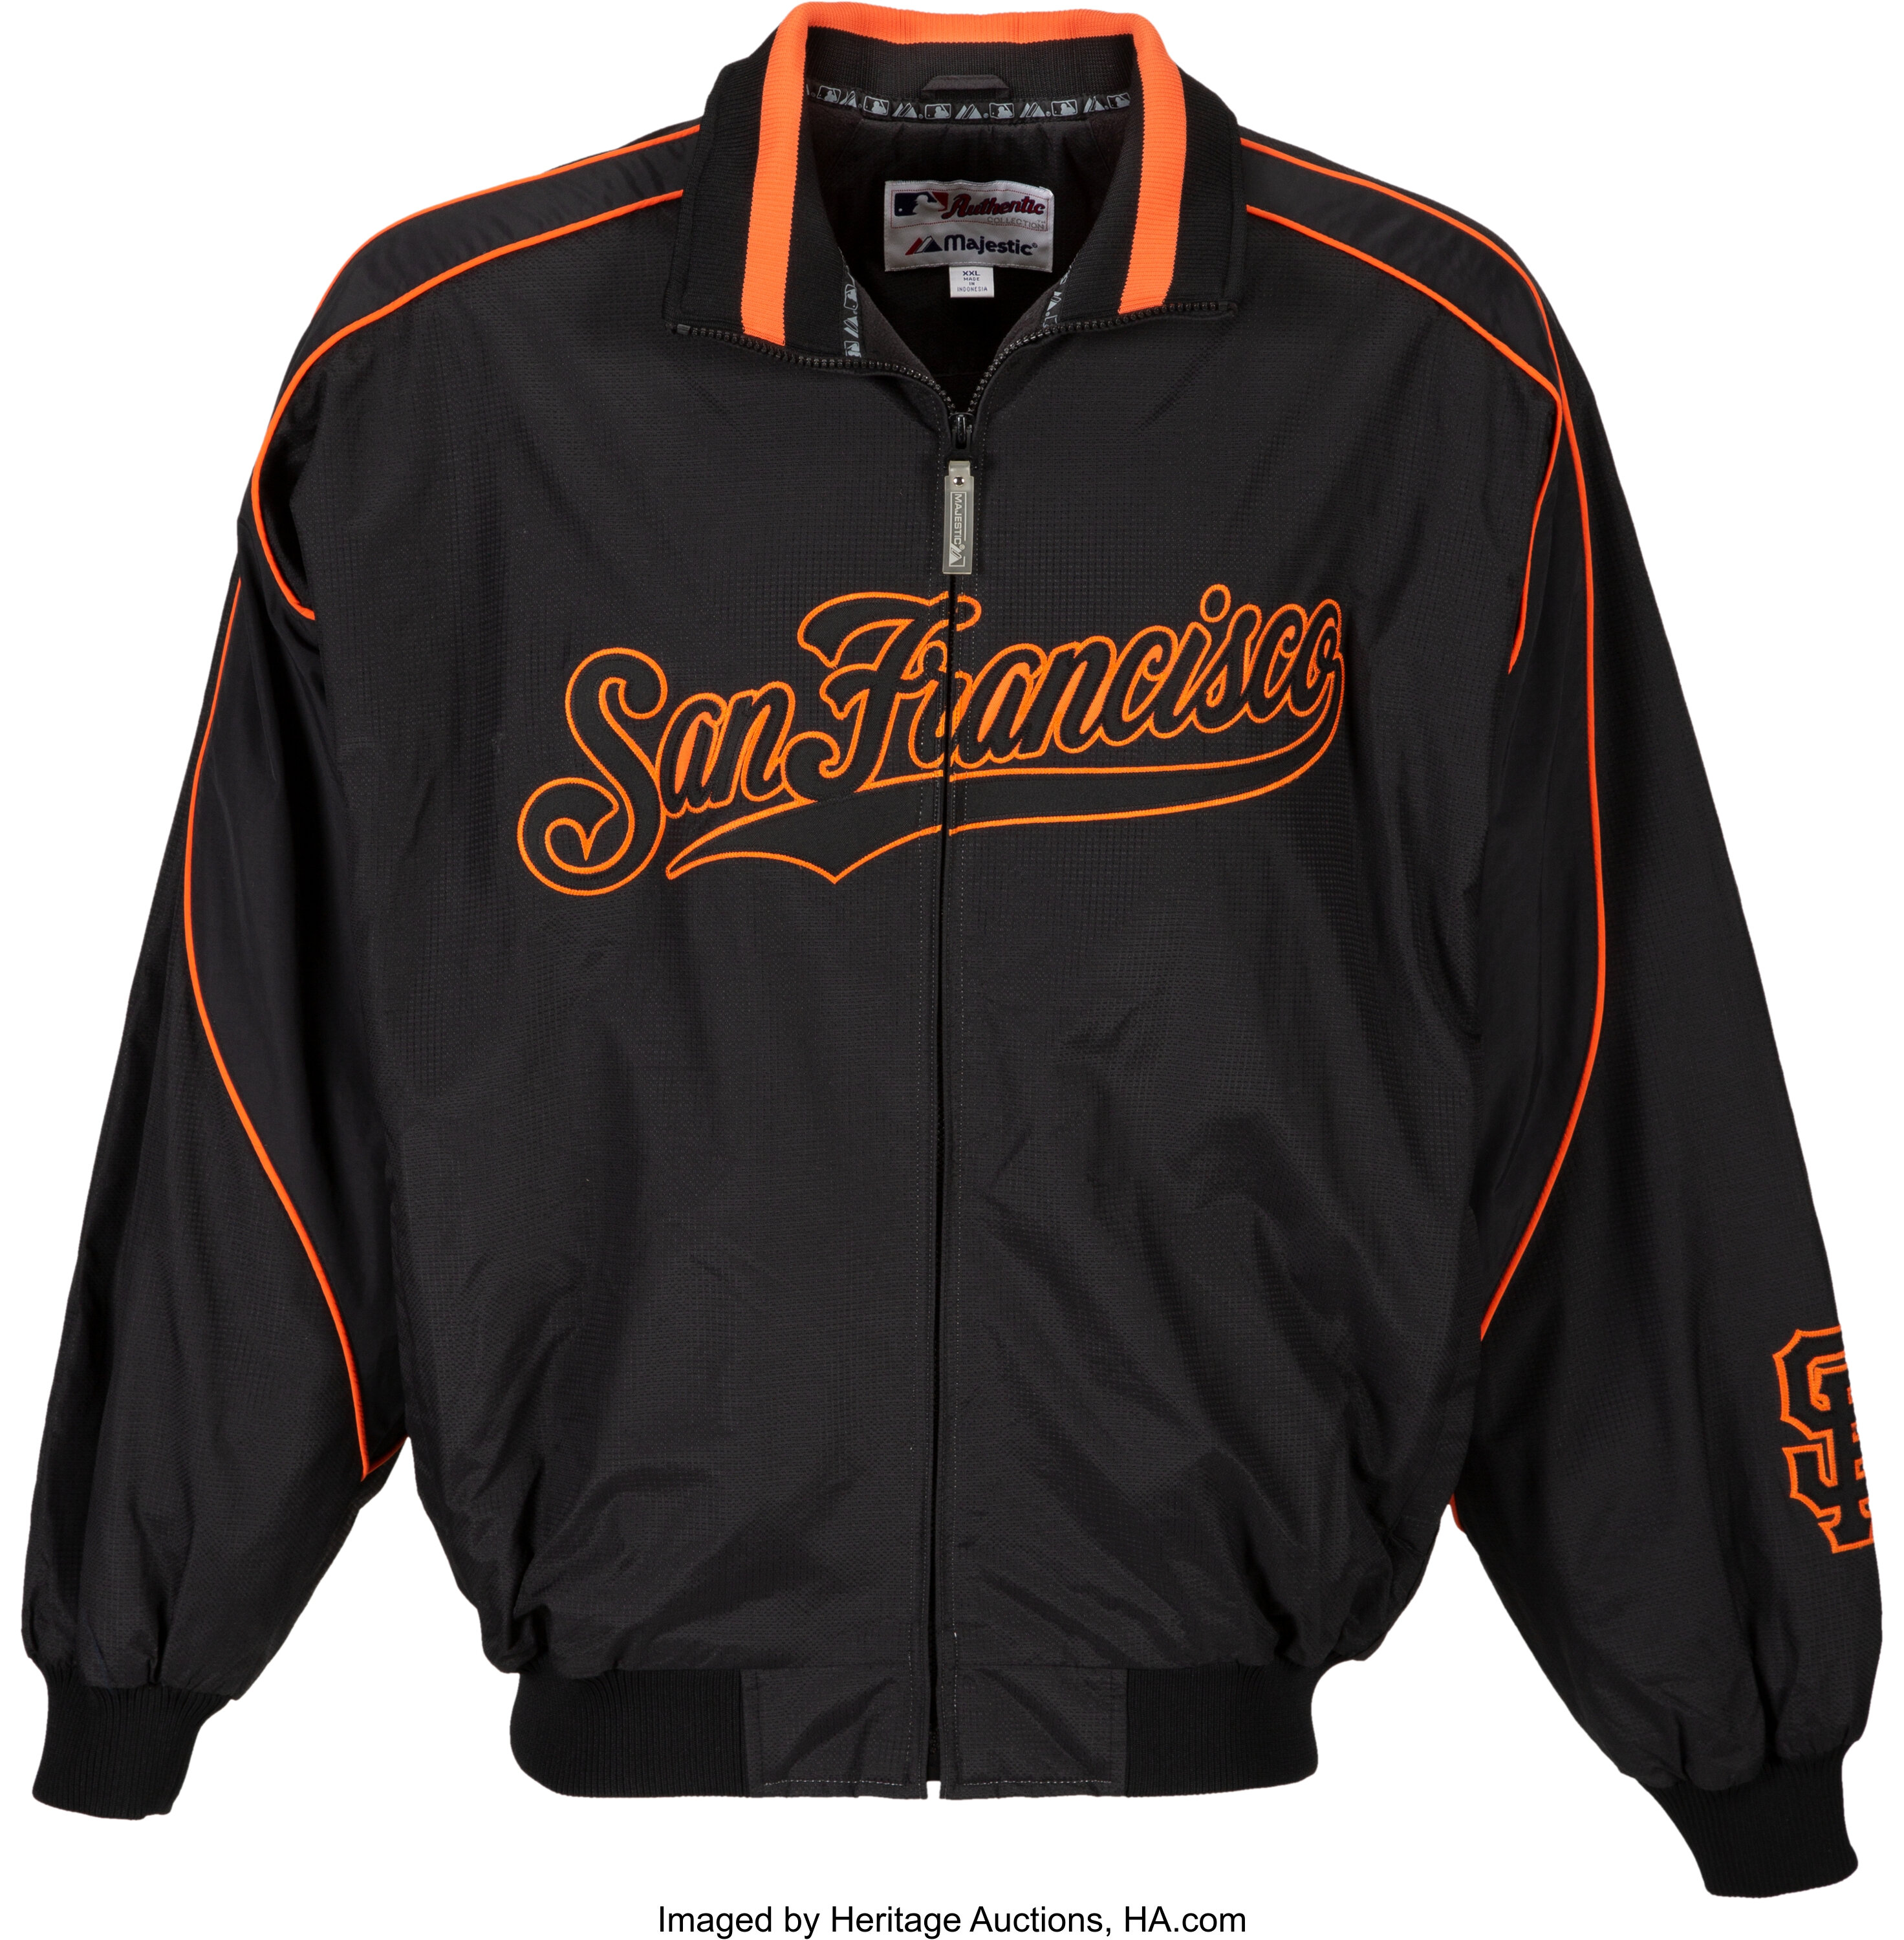 2006 Willie McCovey Worn San Francisco Giants Jacket from The